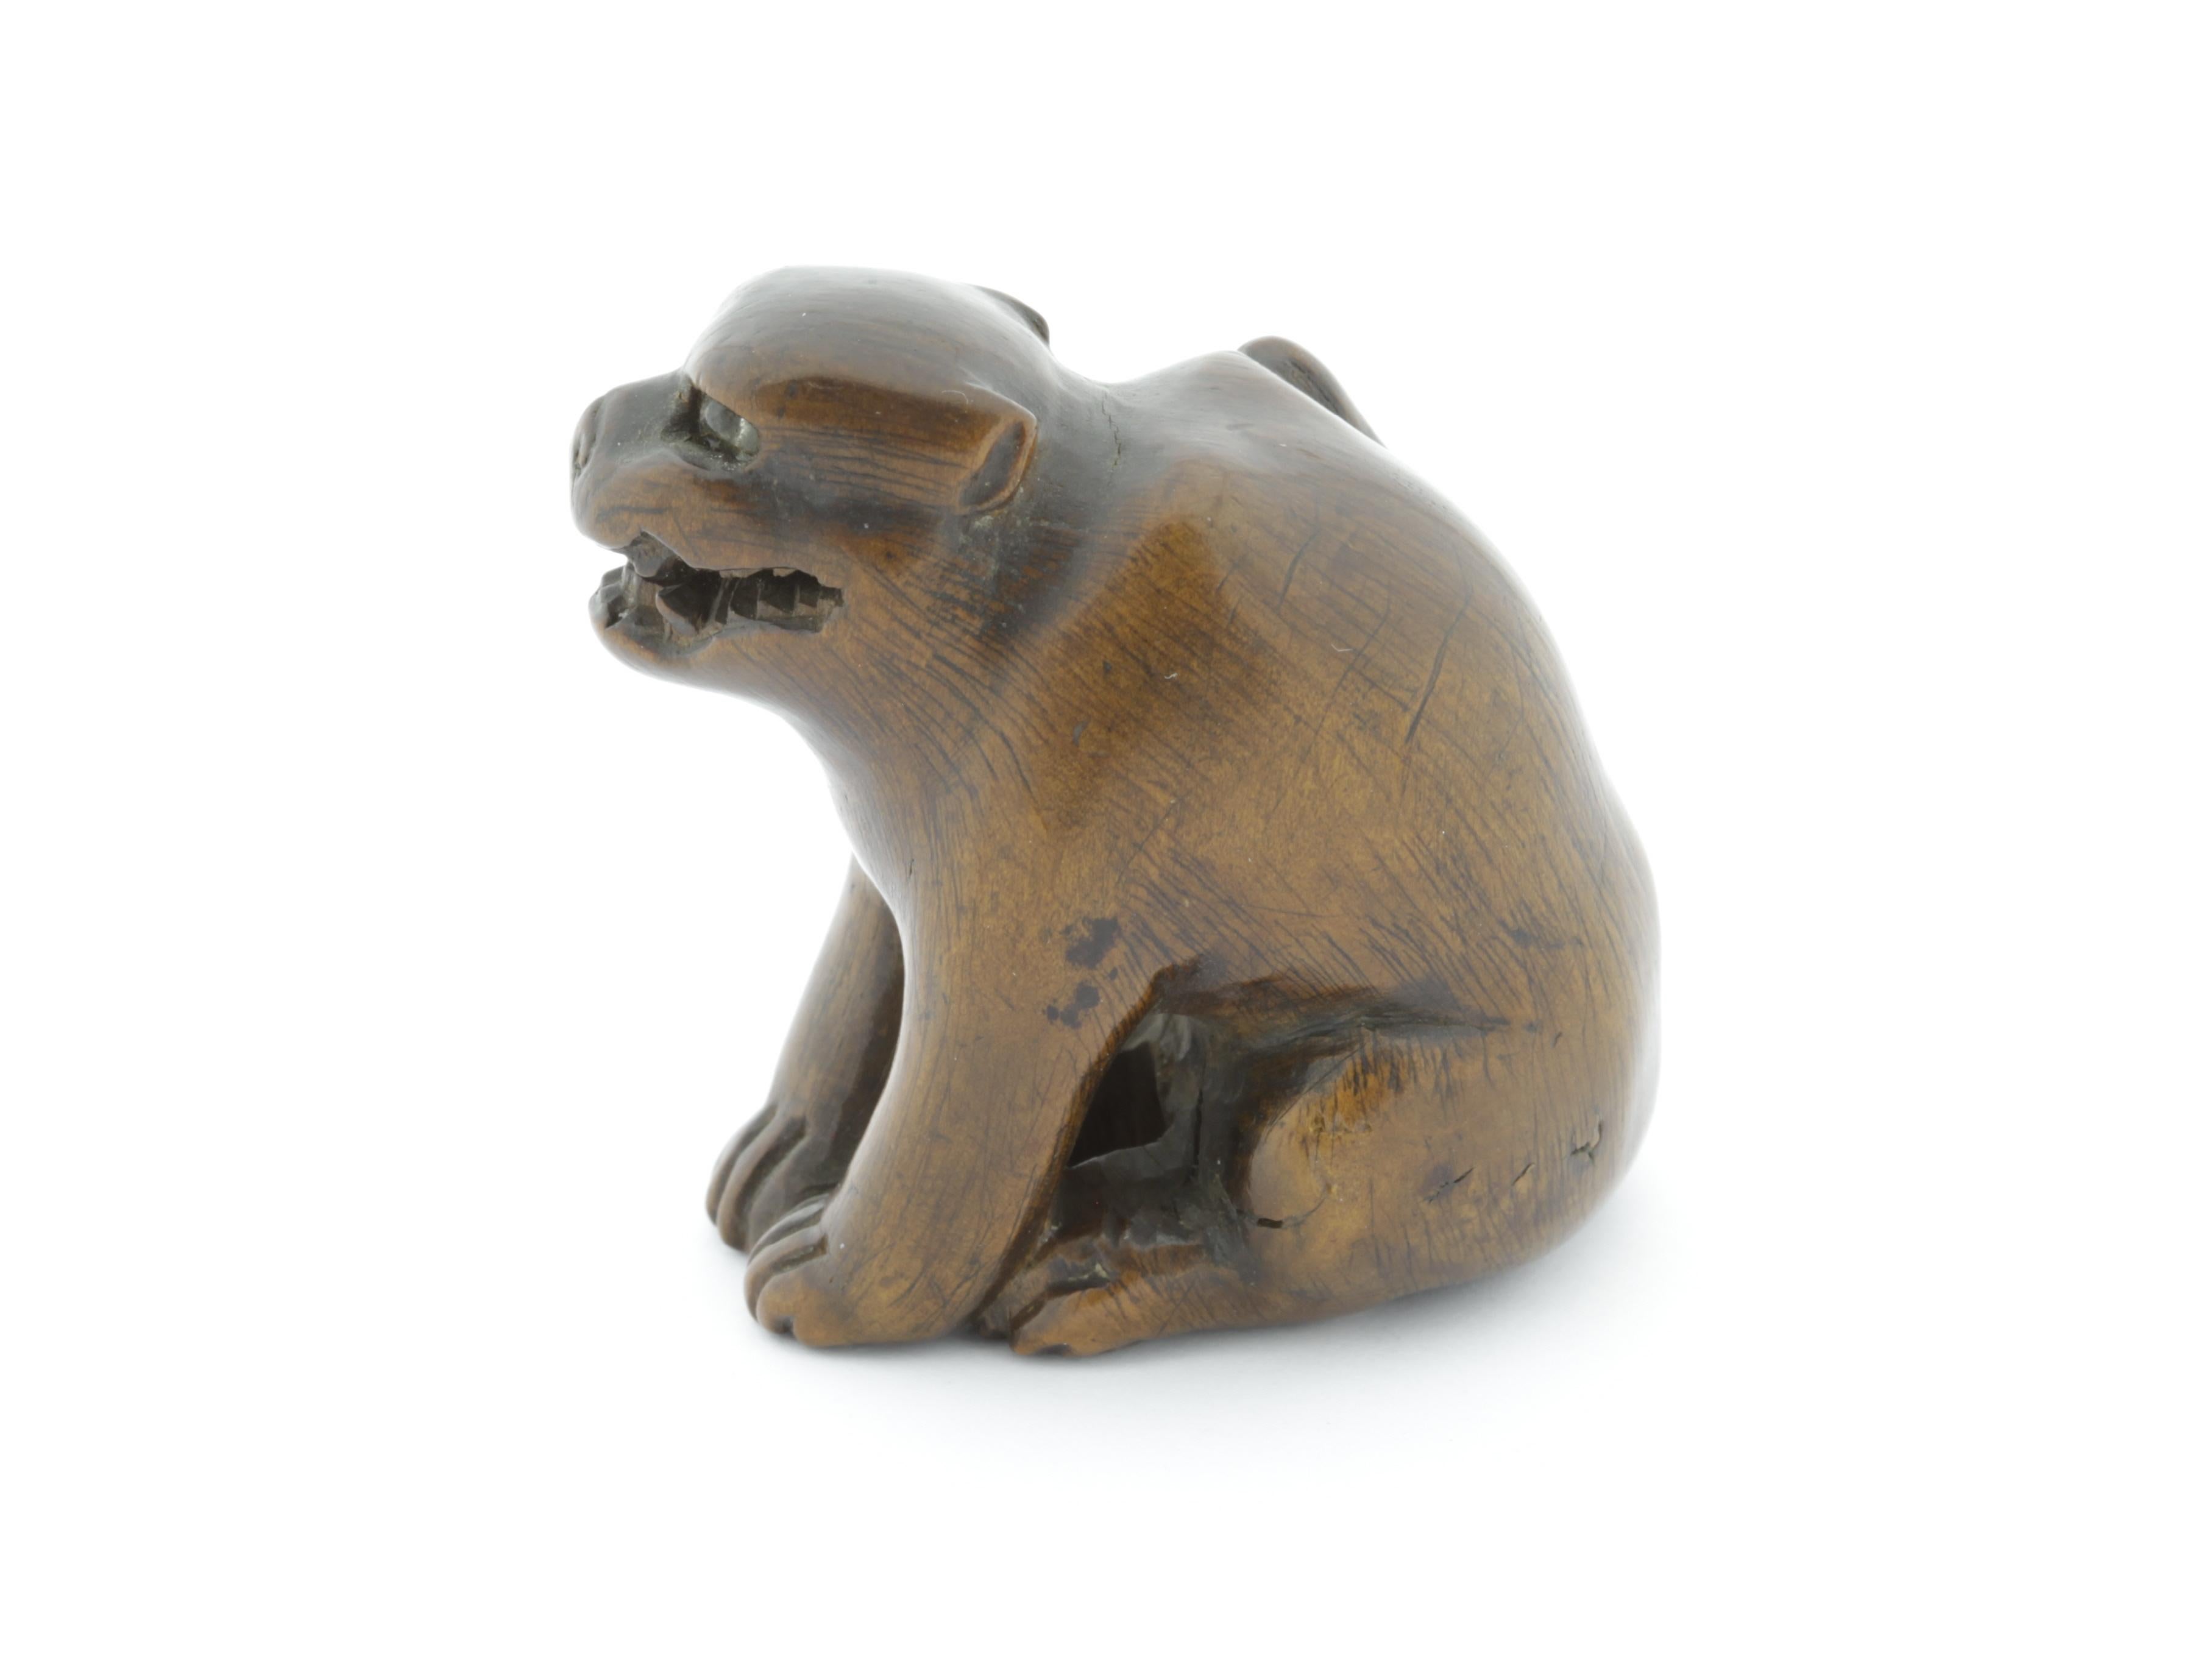 This growling dog netsuke is made entirely out of wood, with glass eyes. As glass was a rare material in 19th century Japan, it can be assumed they are a later addition, perhaps as part of a restoration. In Japanese culture, the dog is the eleventh